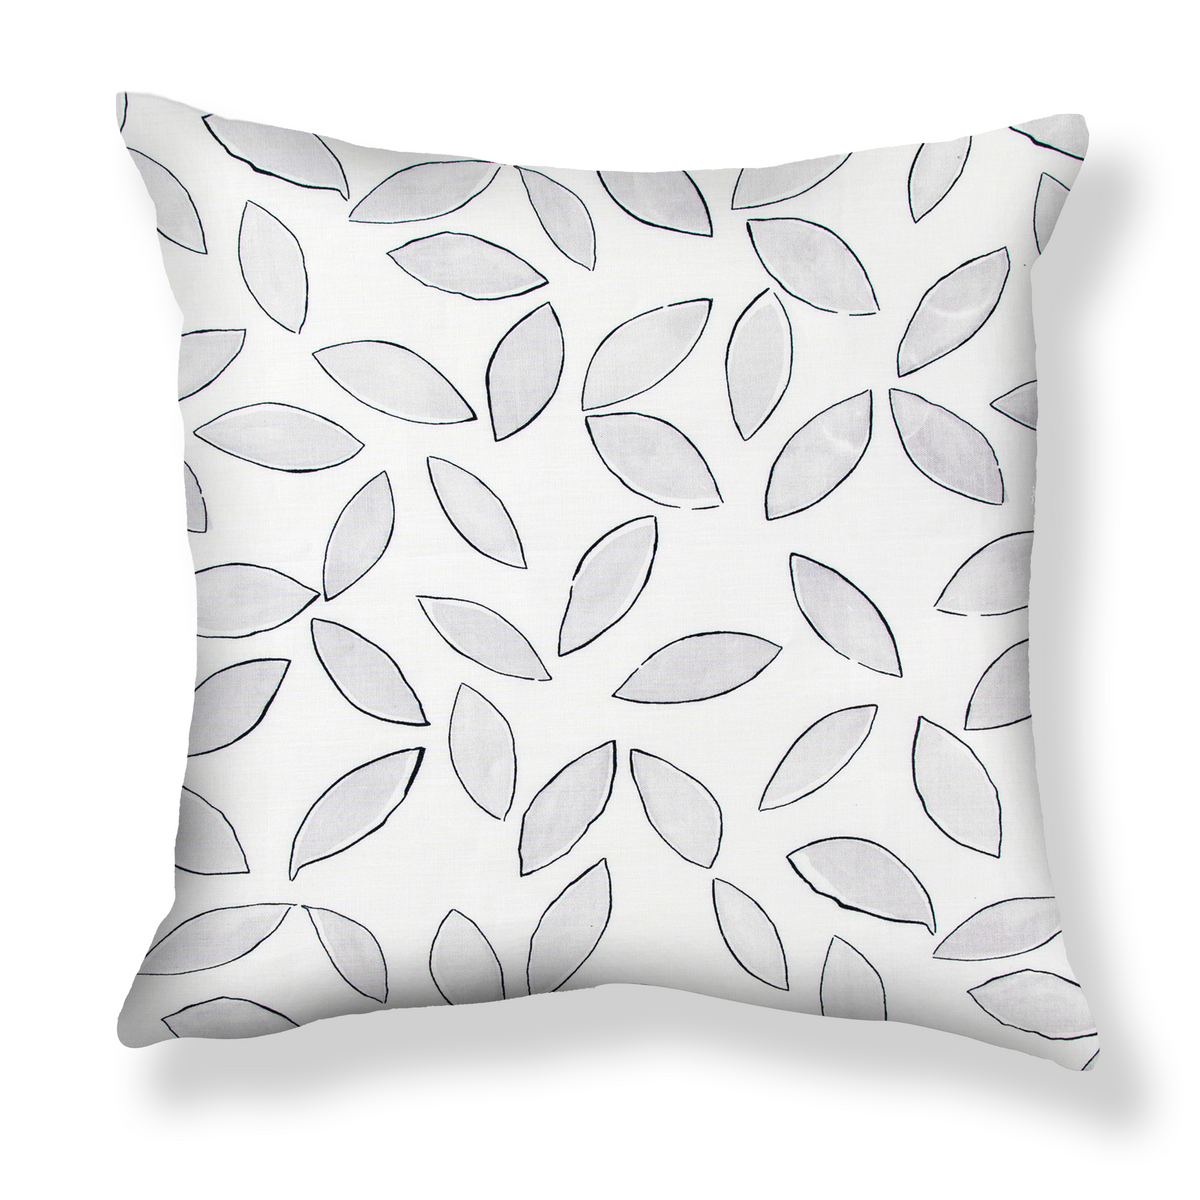 Leaves Pillow in Stone Gray/Black